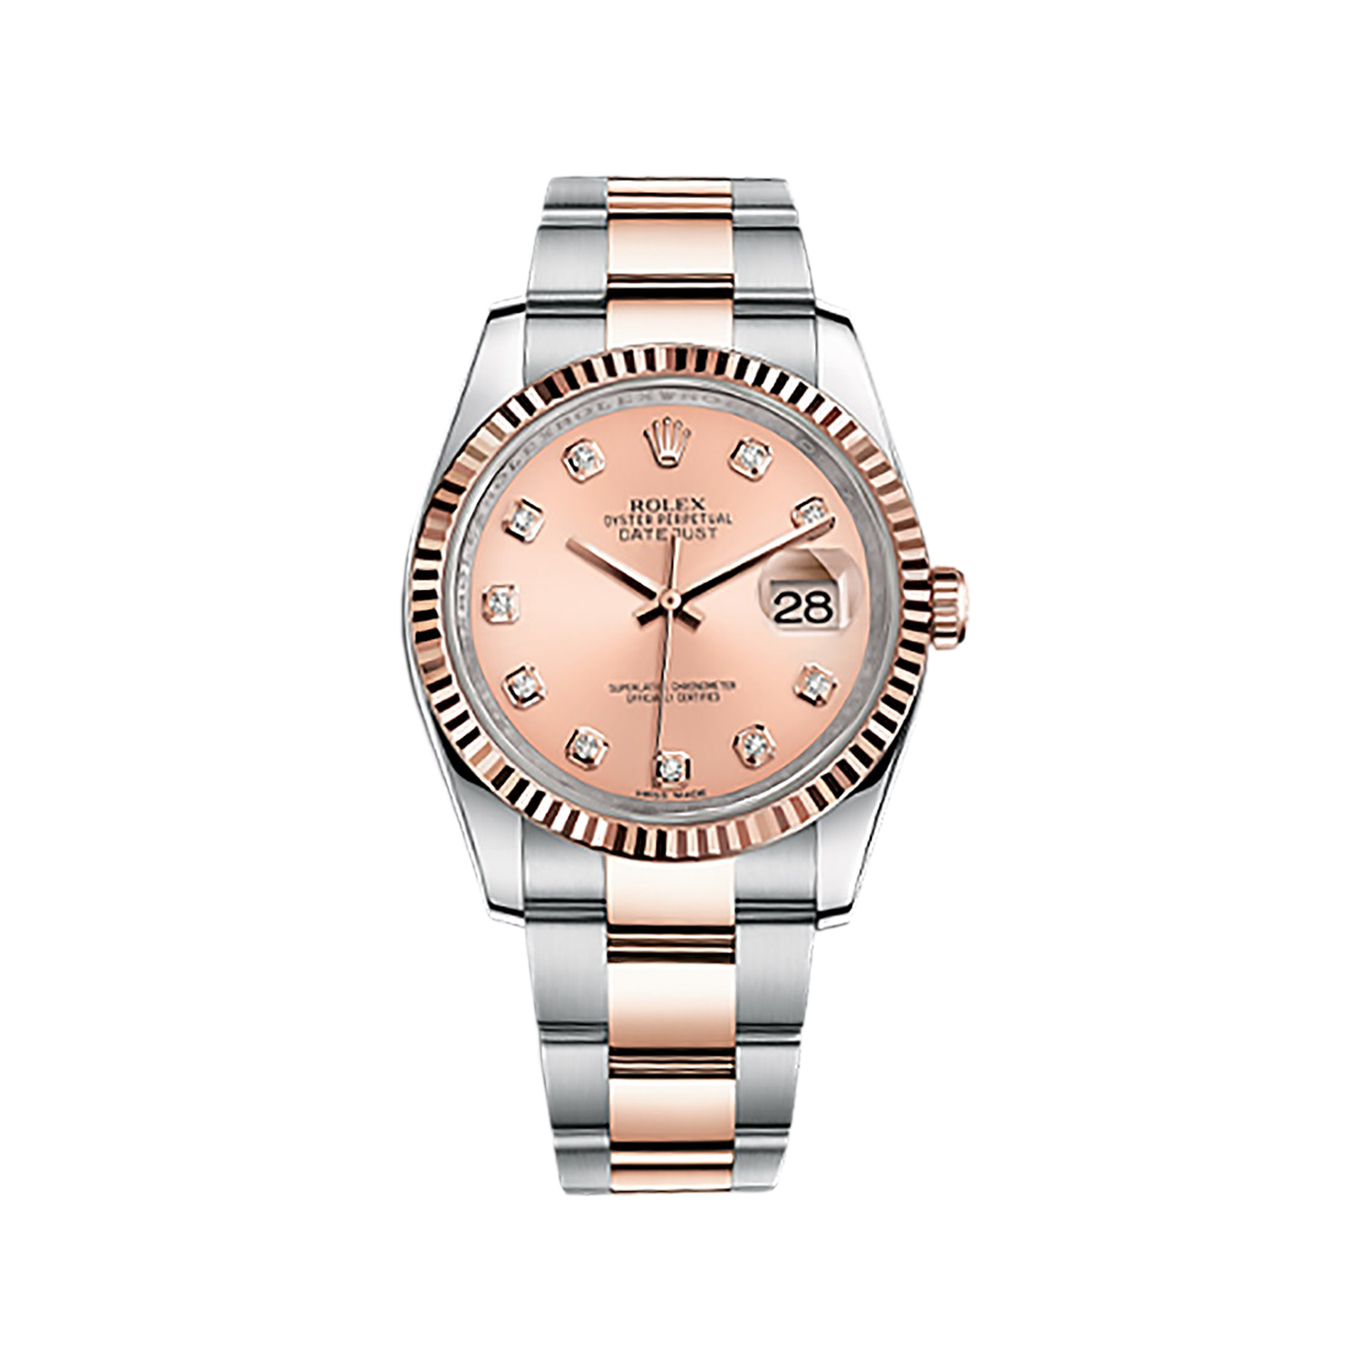 Datejust 36 116231 Rose Gold & Stainless Steel Watch (Pink Set with Diamonds)